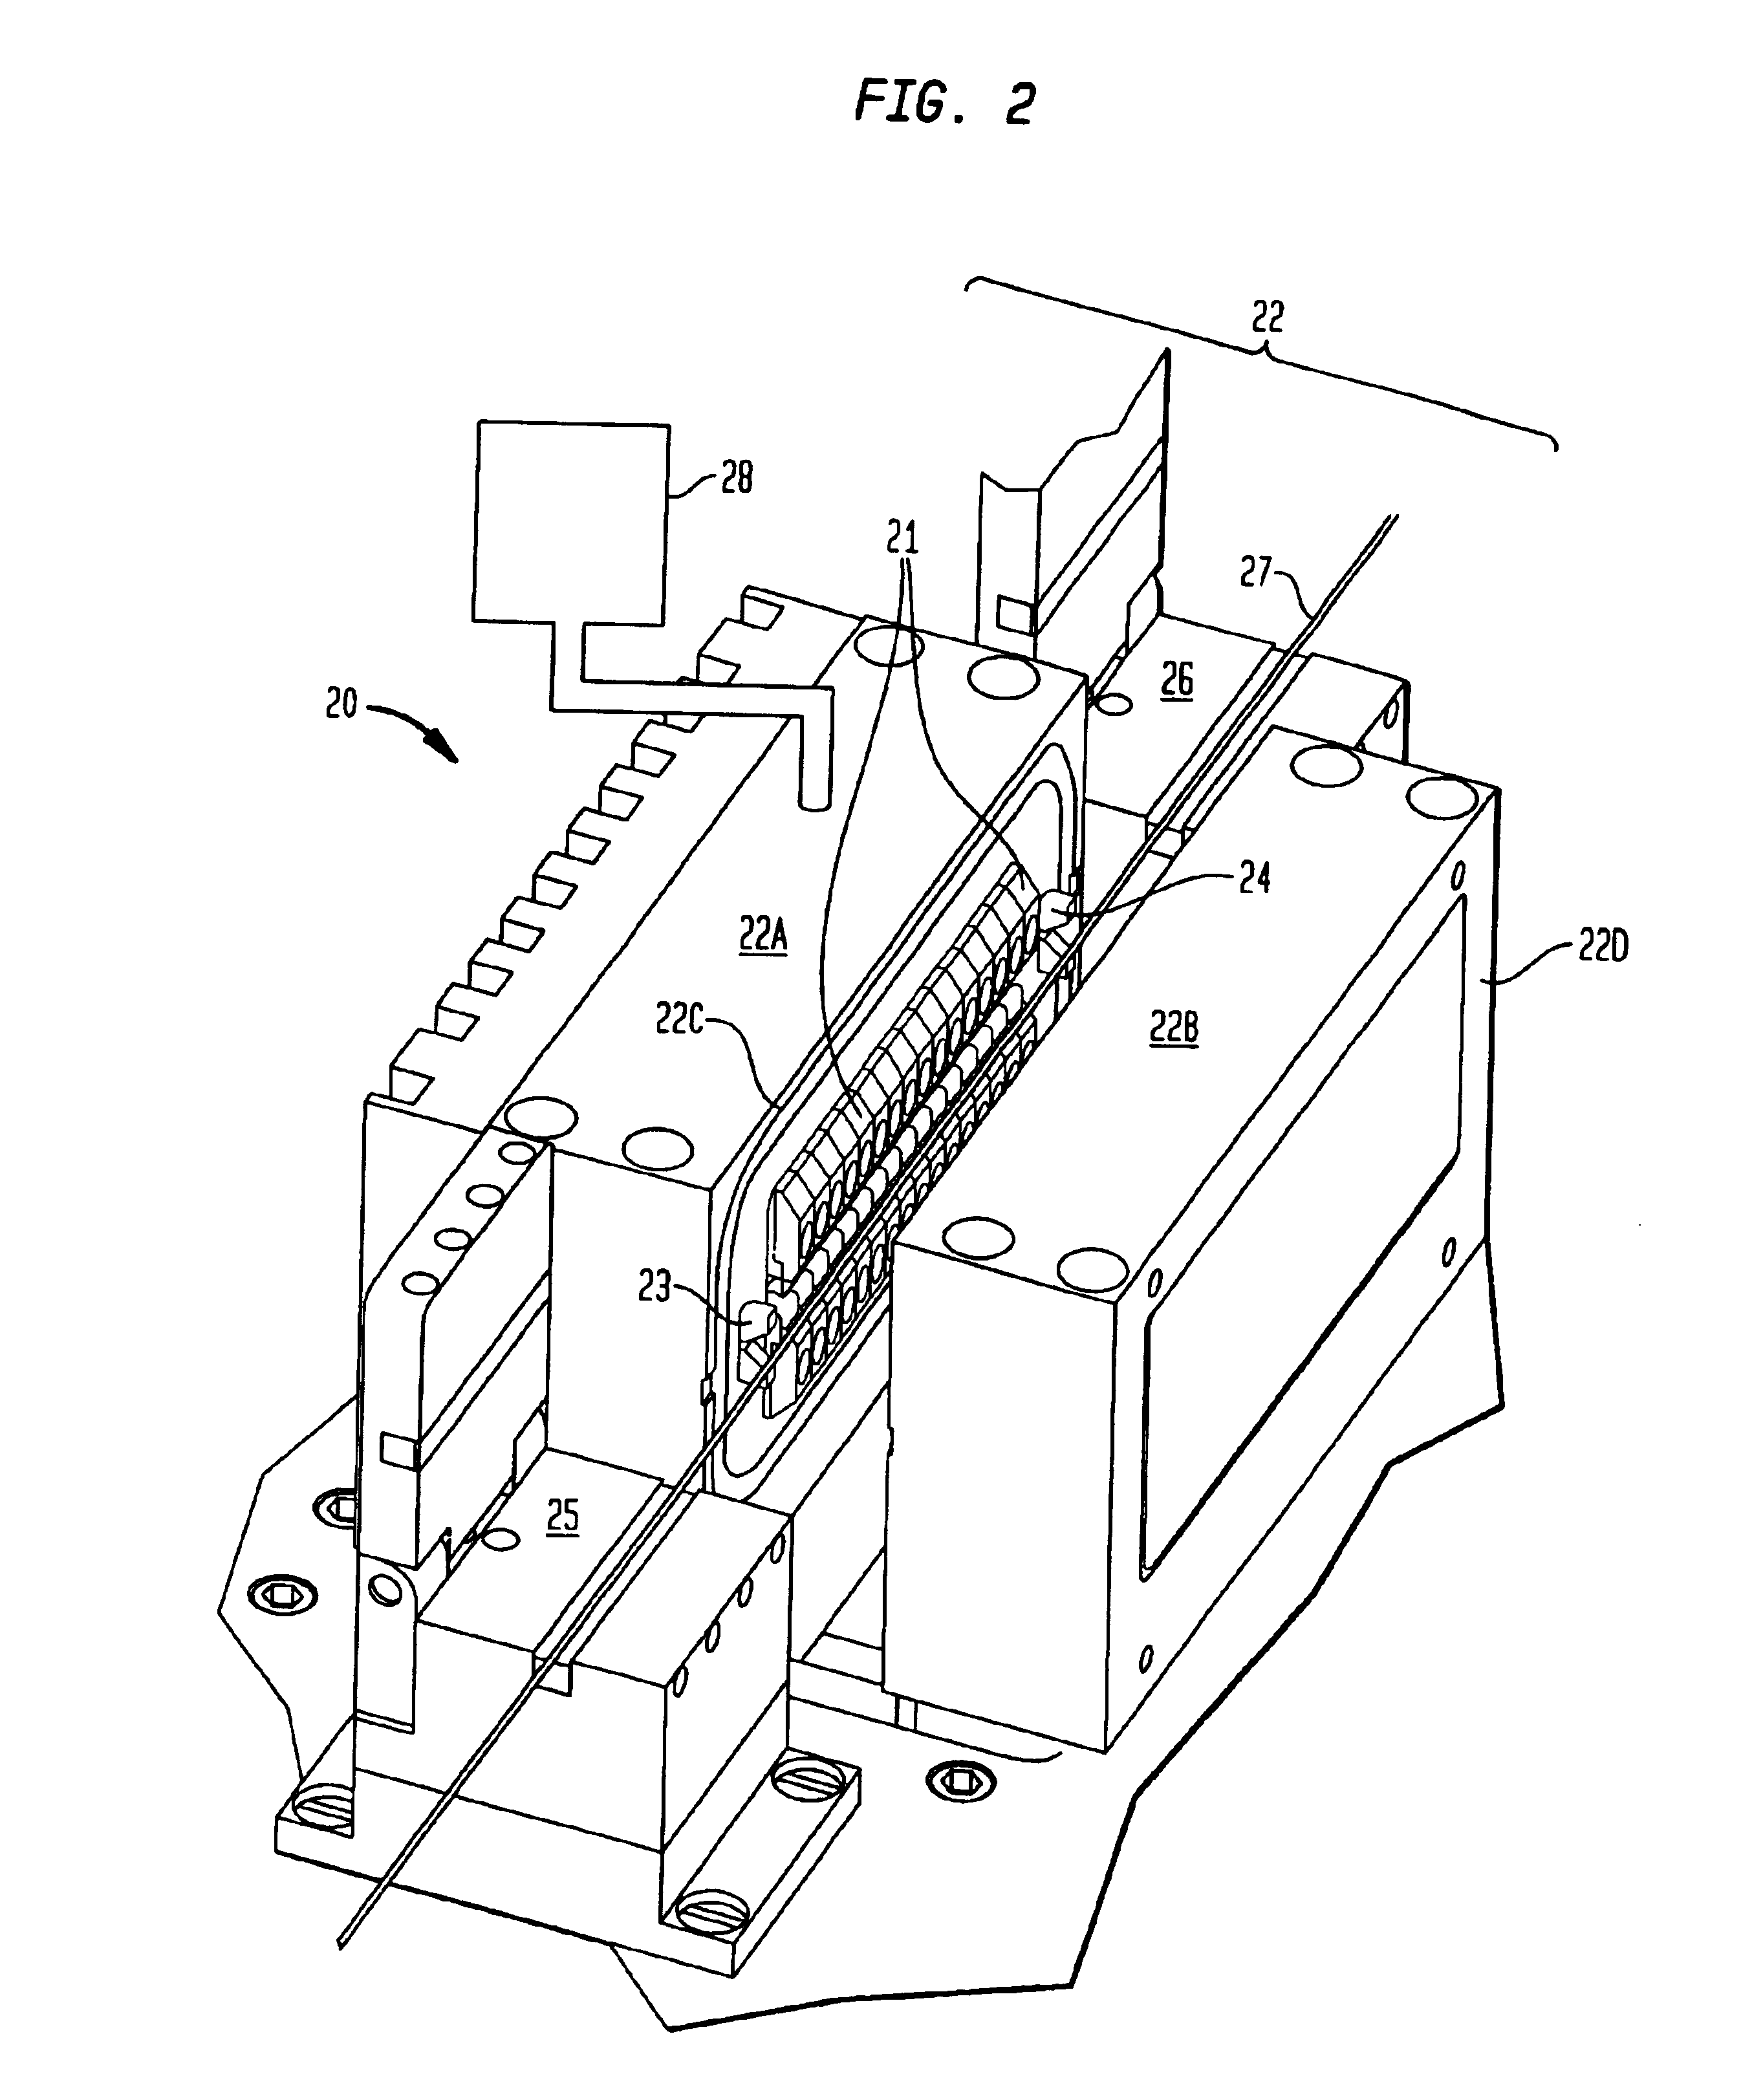 Method and apparatus for removing polymeric coatings from optical fiber in a non-oxidizing environment